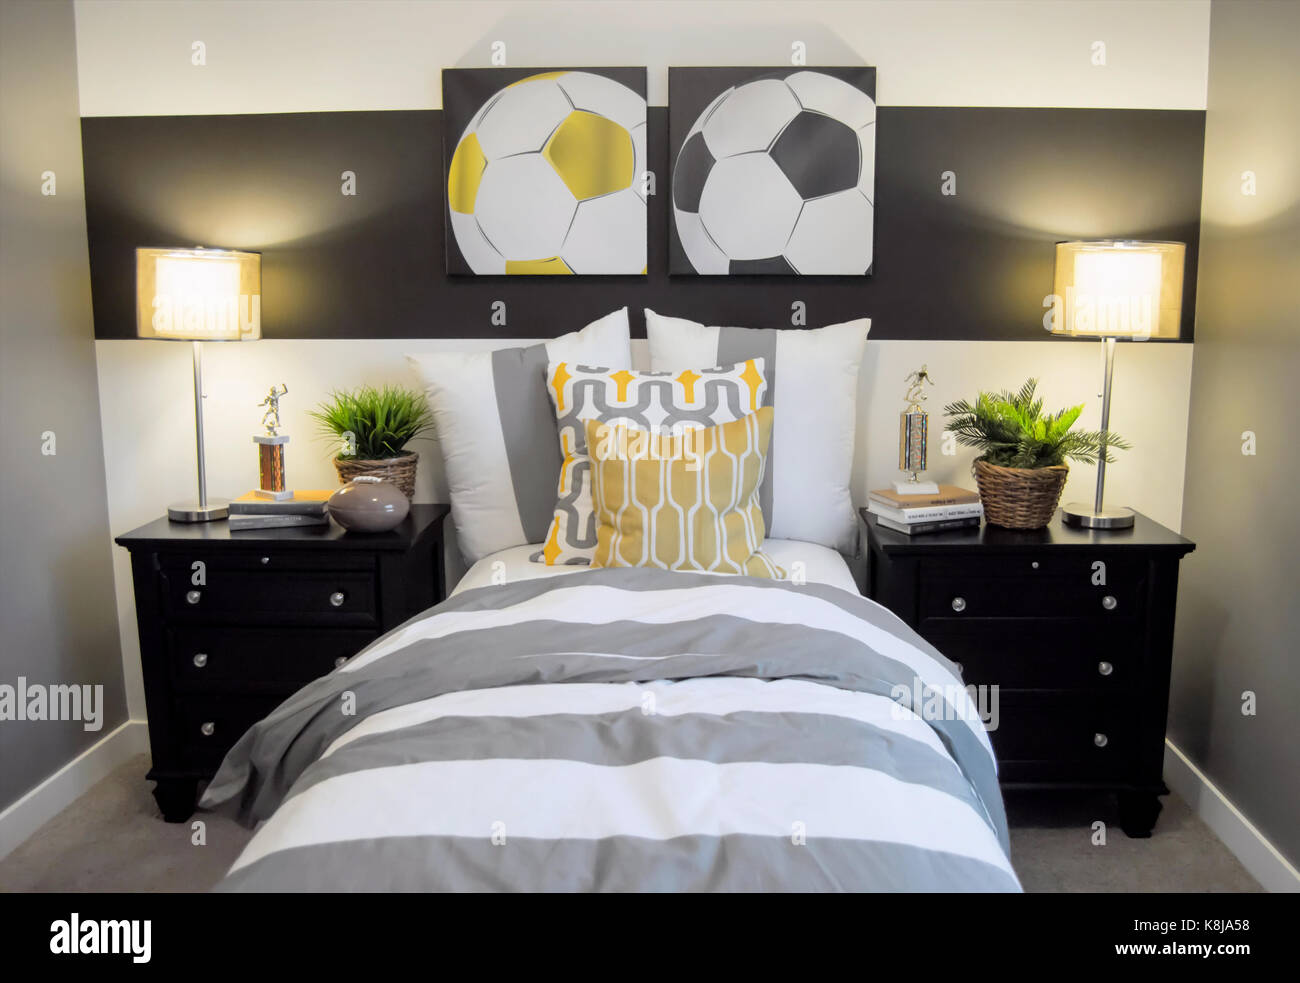 A Soccer Decorated Bedroom With A Single Bed And Nightstands Stock